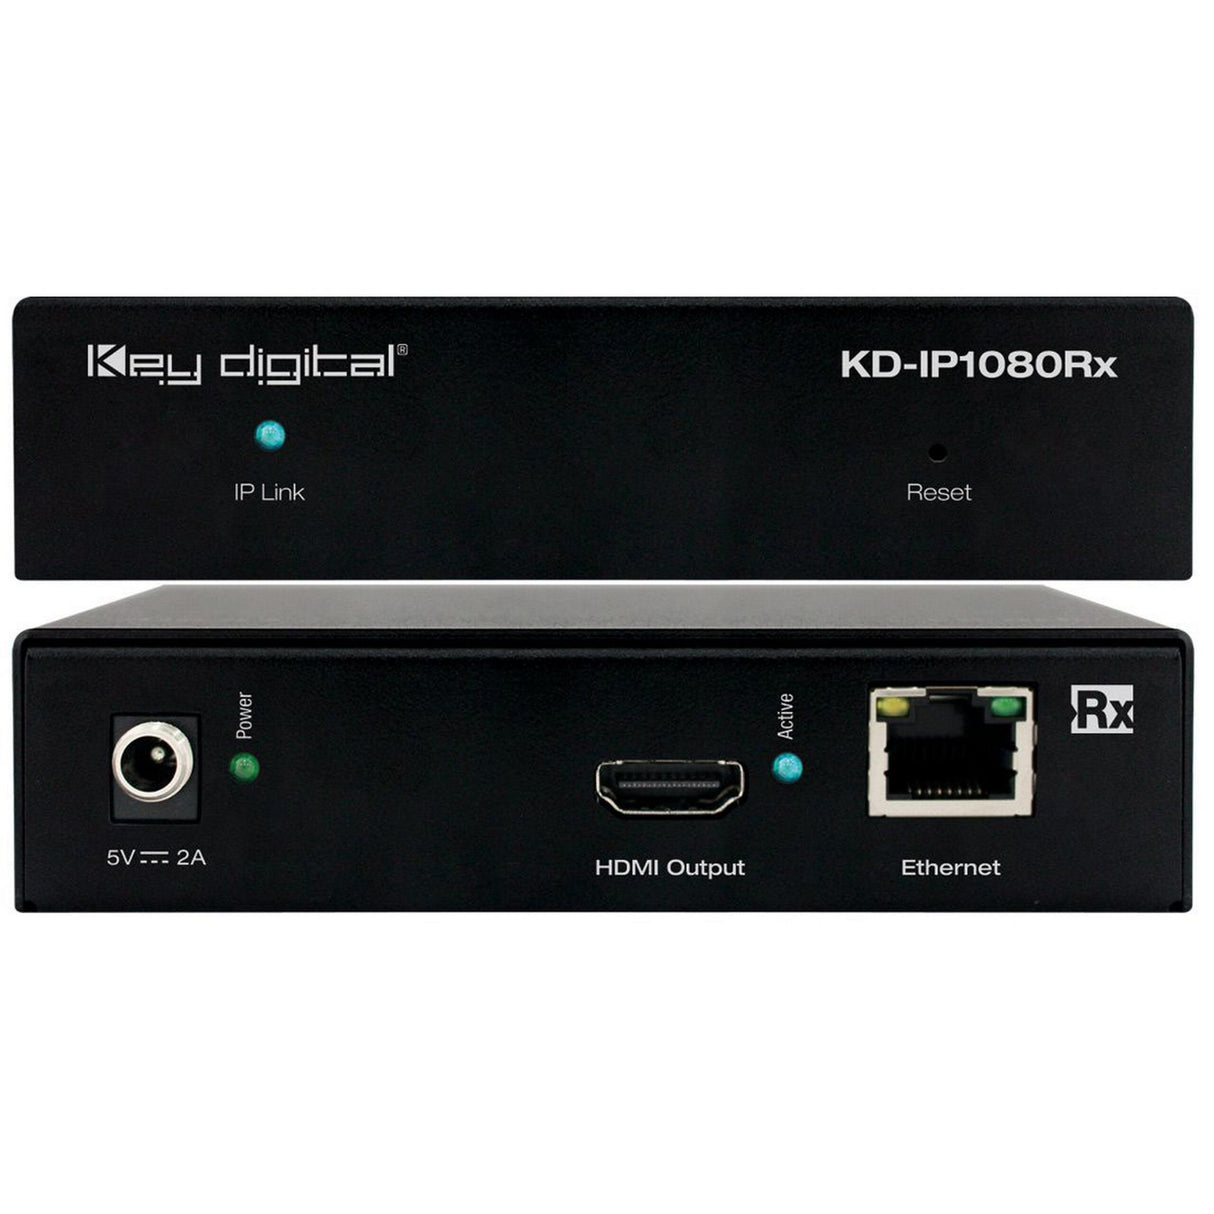 Key Digital KD-IP1080RX HDMI over IP with POE Receiver